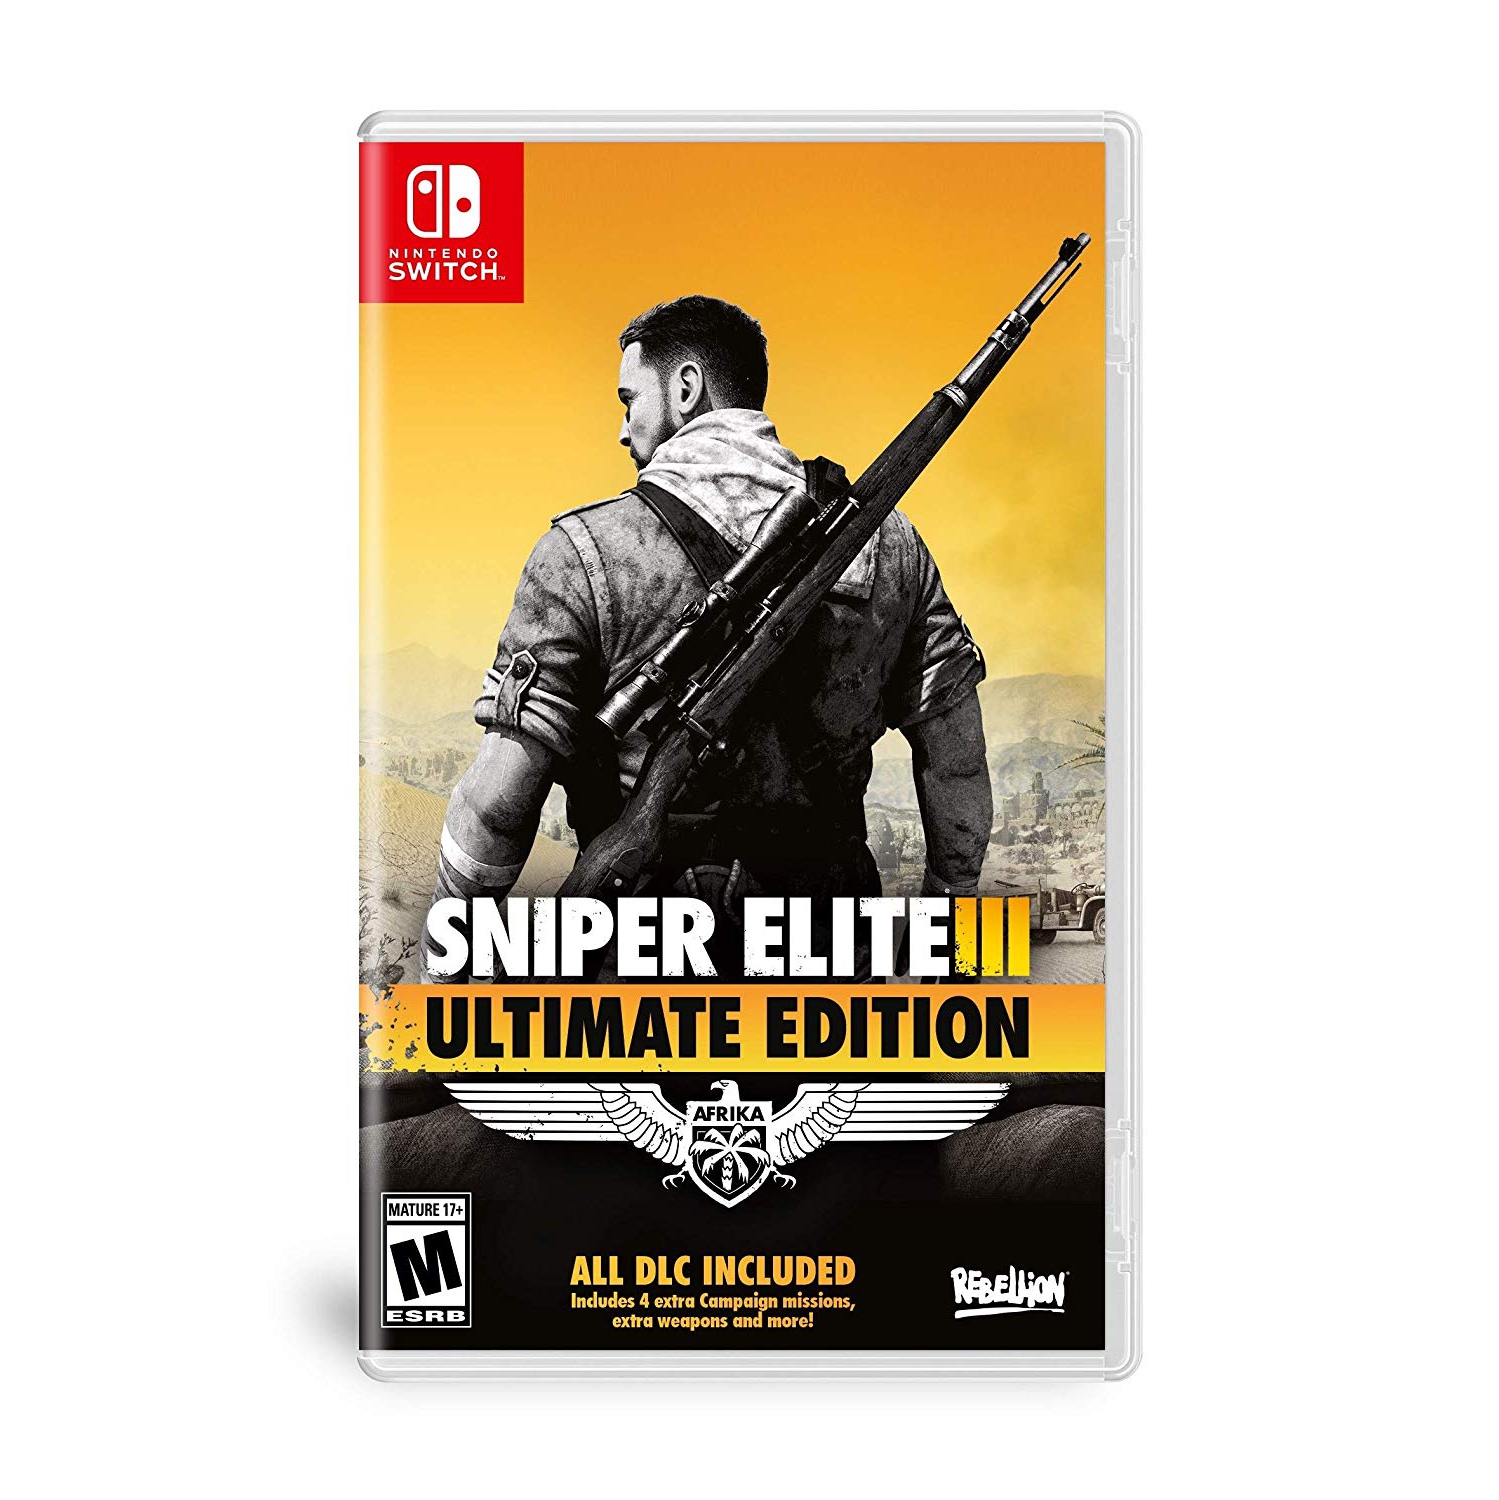 Sniper Elite 3 Ultimate Edition Nintendo Switch Games and Software